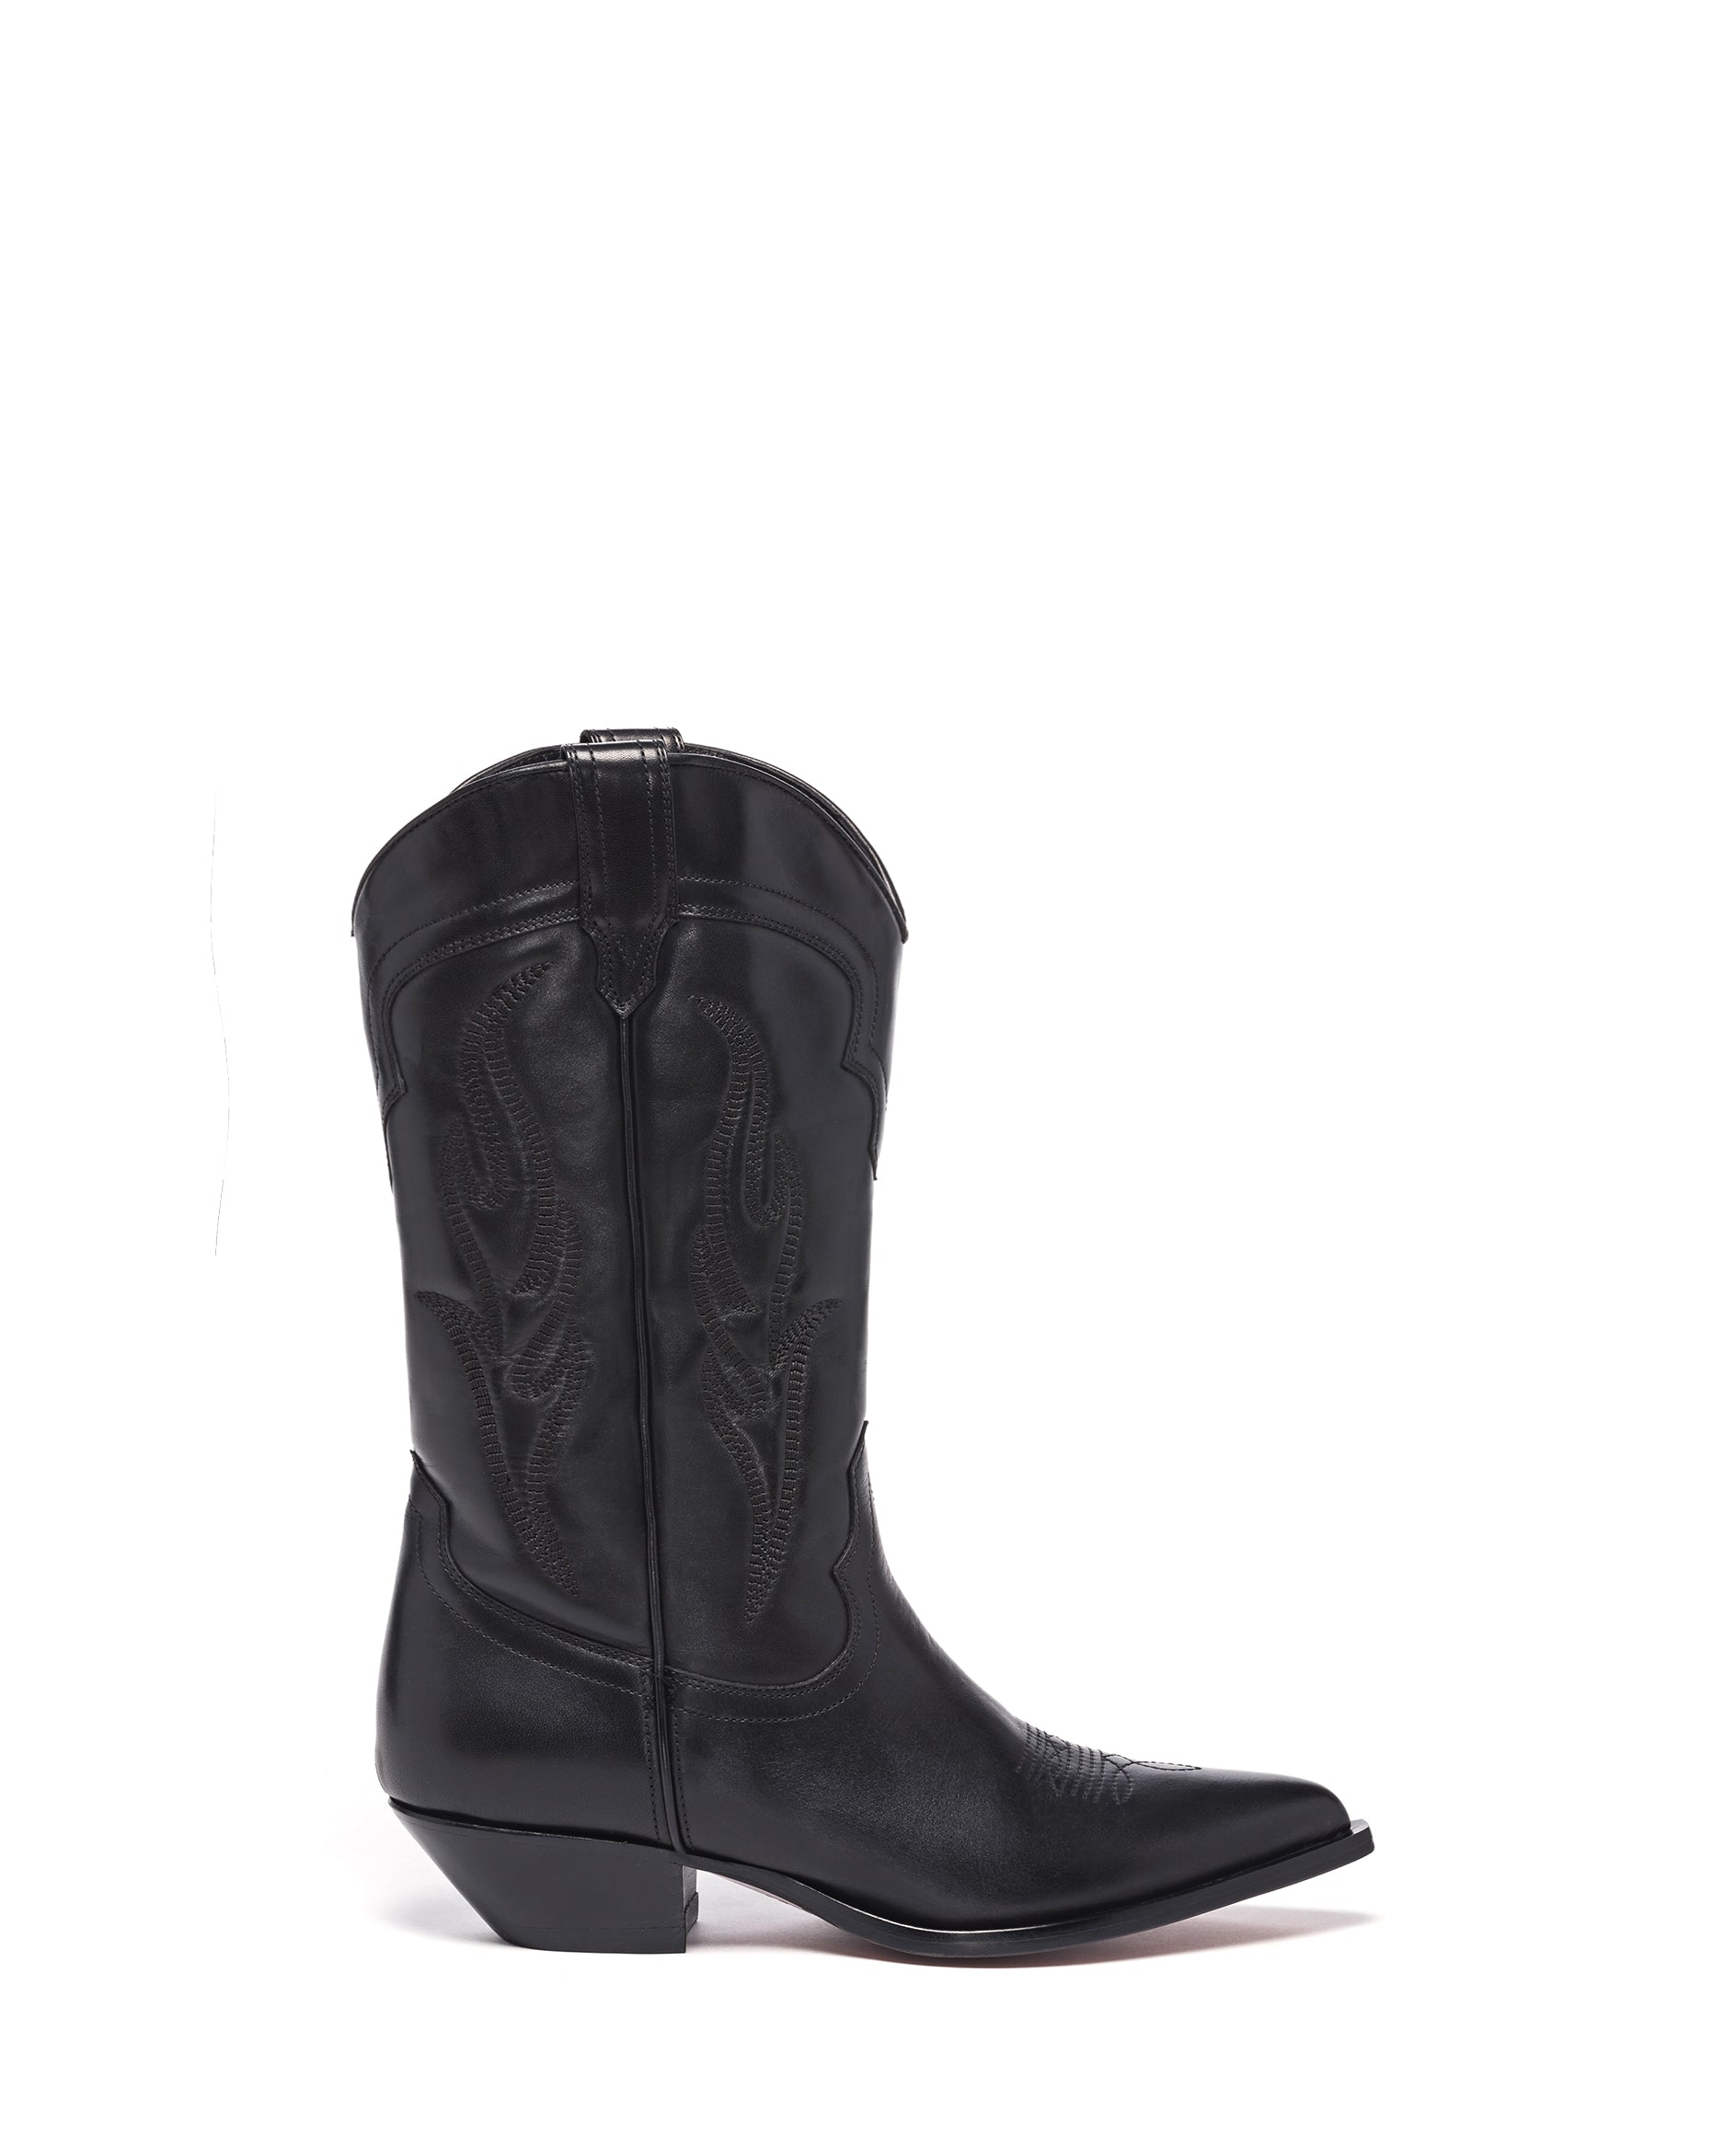 SANTA FE Women's Cowboy Boots in Black Calfskin | On tone embroidery 01